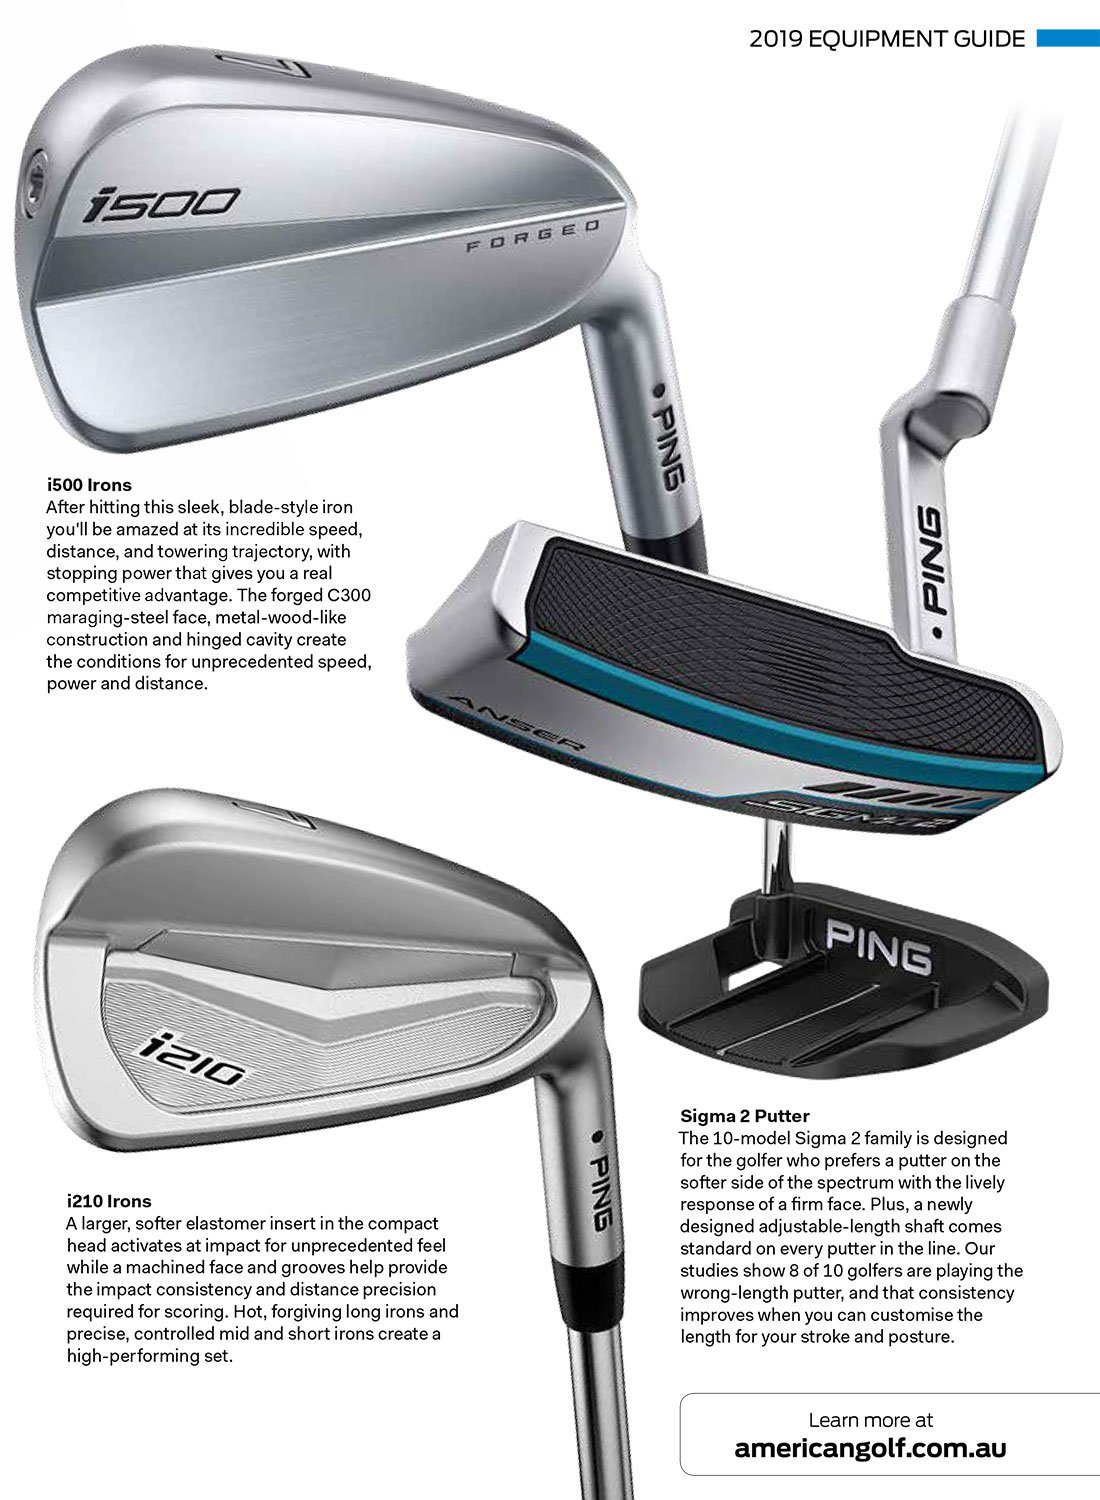 2019 Equipment Guide: PING